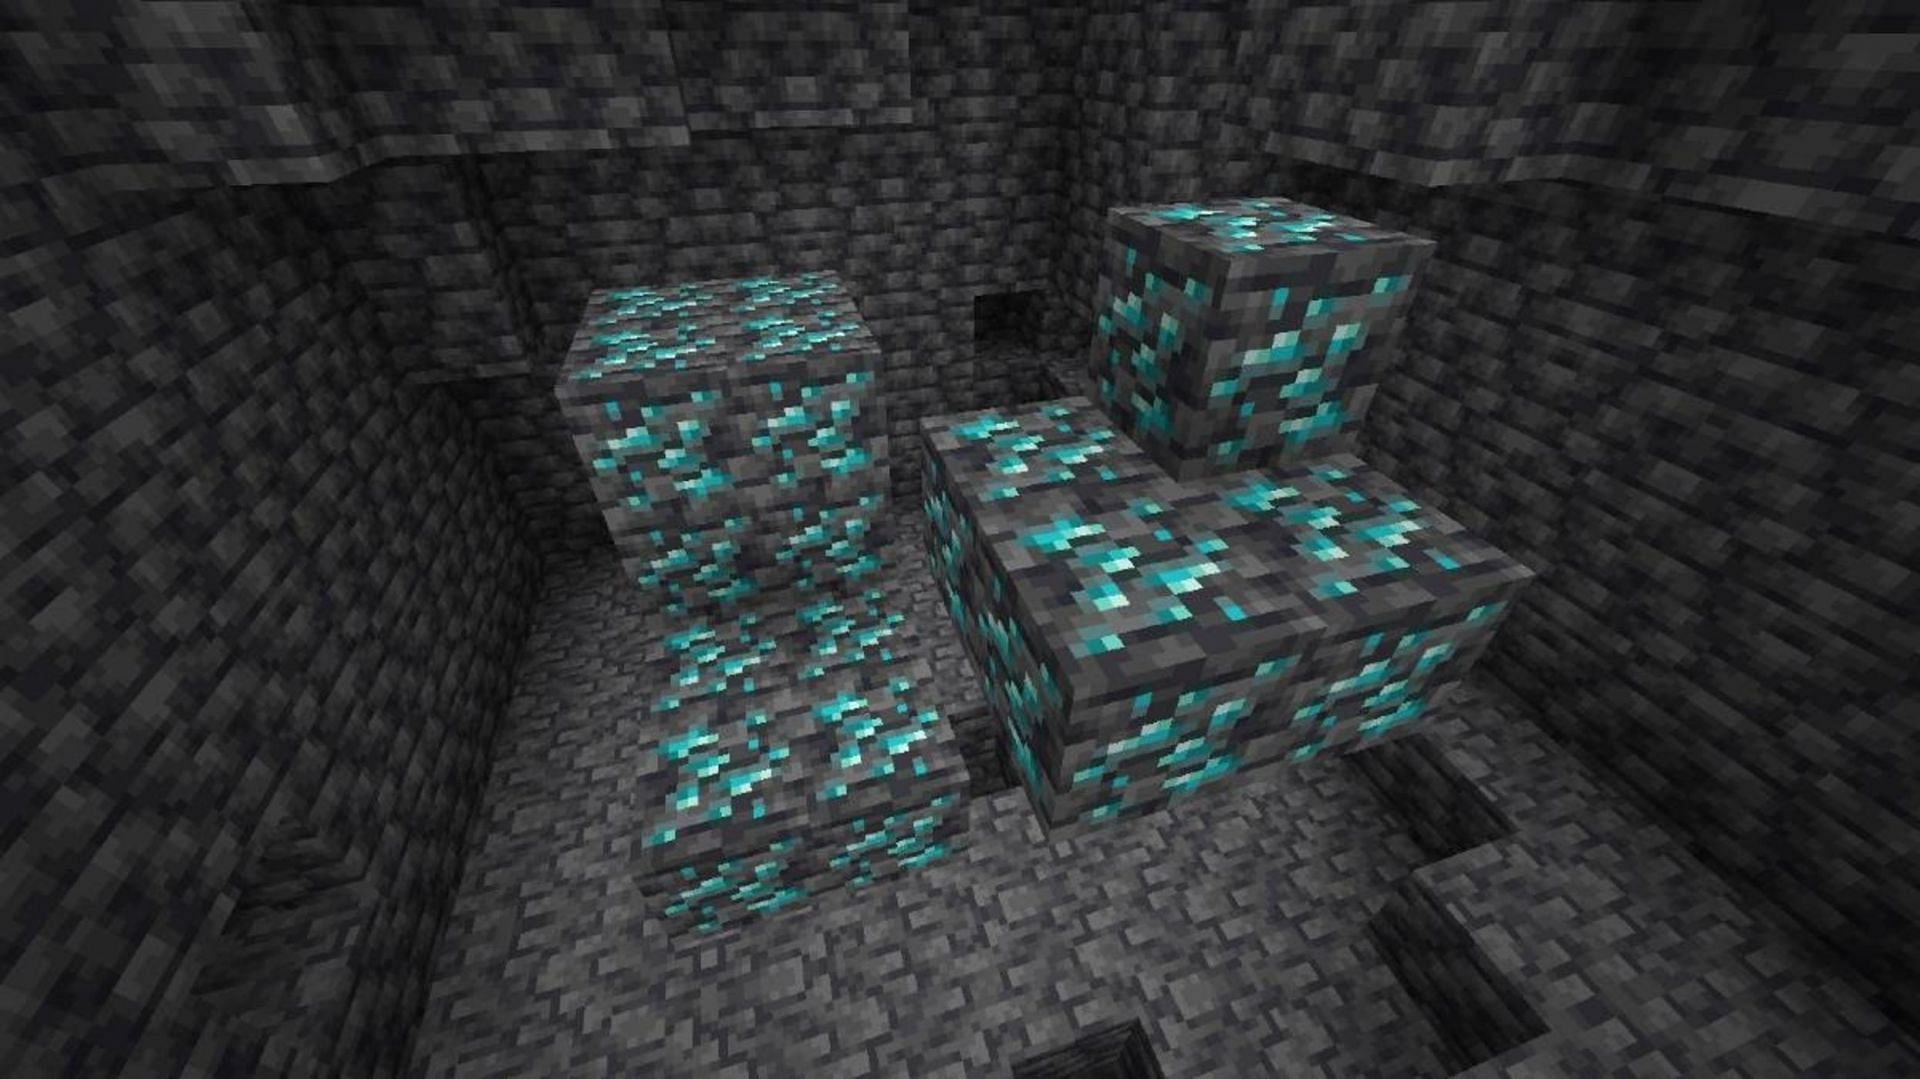 Using world seeds can help players quickly find diamond ore (Image via Mojang)